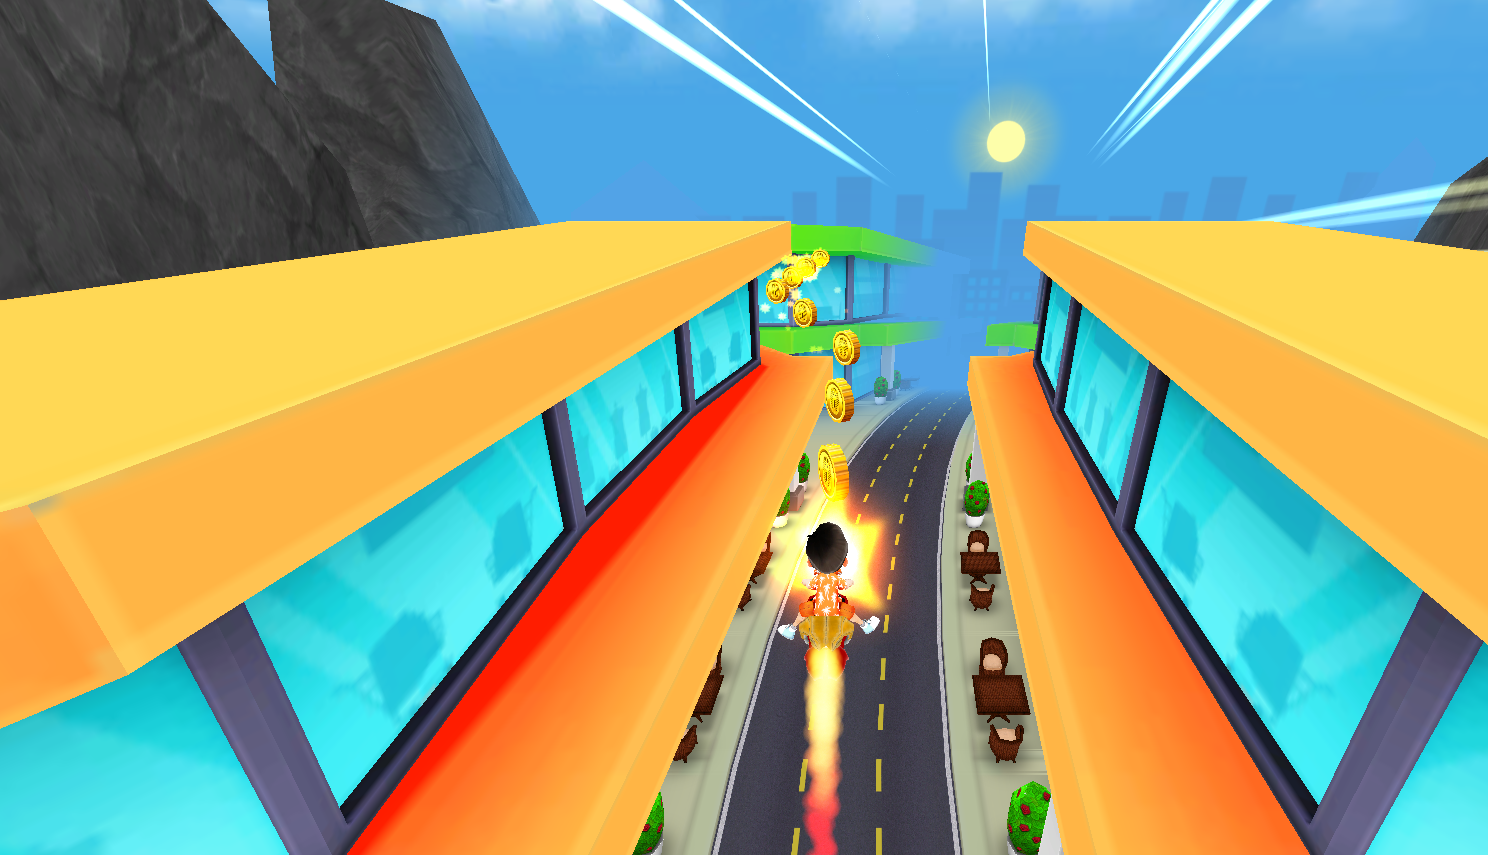 GameLoop - [Game Recommendation: SUBWAY SURFER] 😁DASH as fast as you can!  🚟DODGE the oncoming trains! 🖥Enjoy the larger screen and flexible  keyboard and mouse control on PC with GameLoop! 👉Download Now